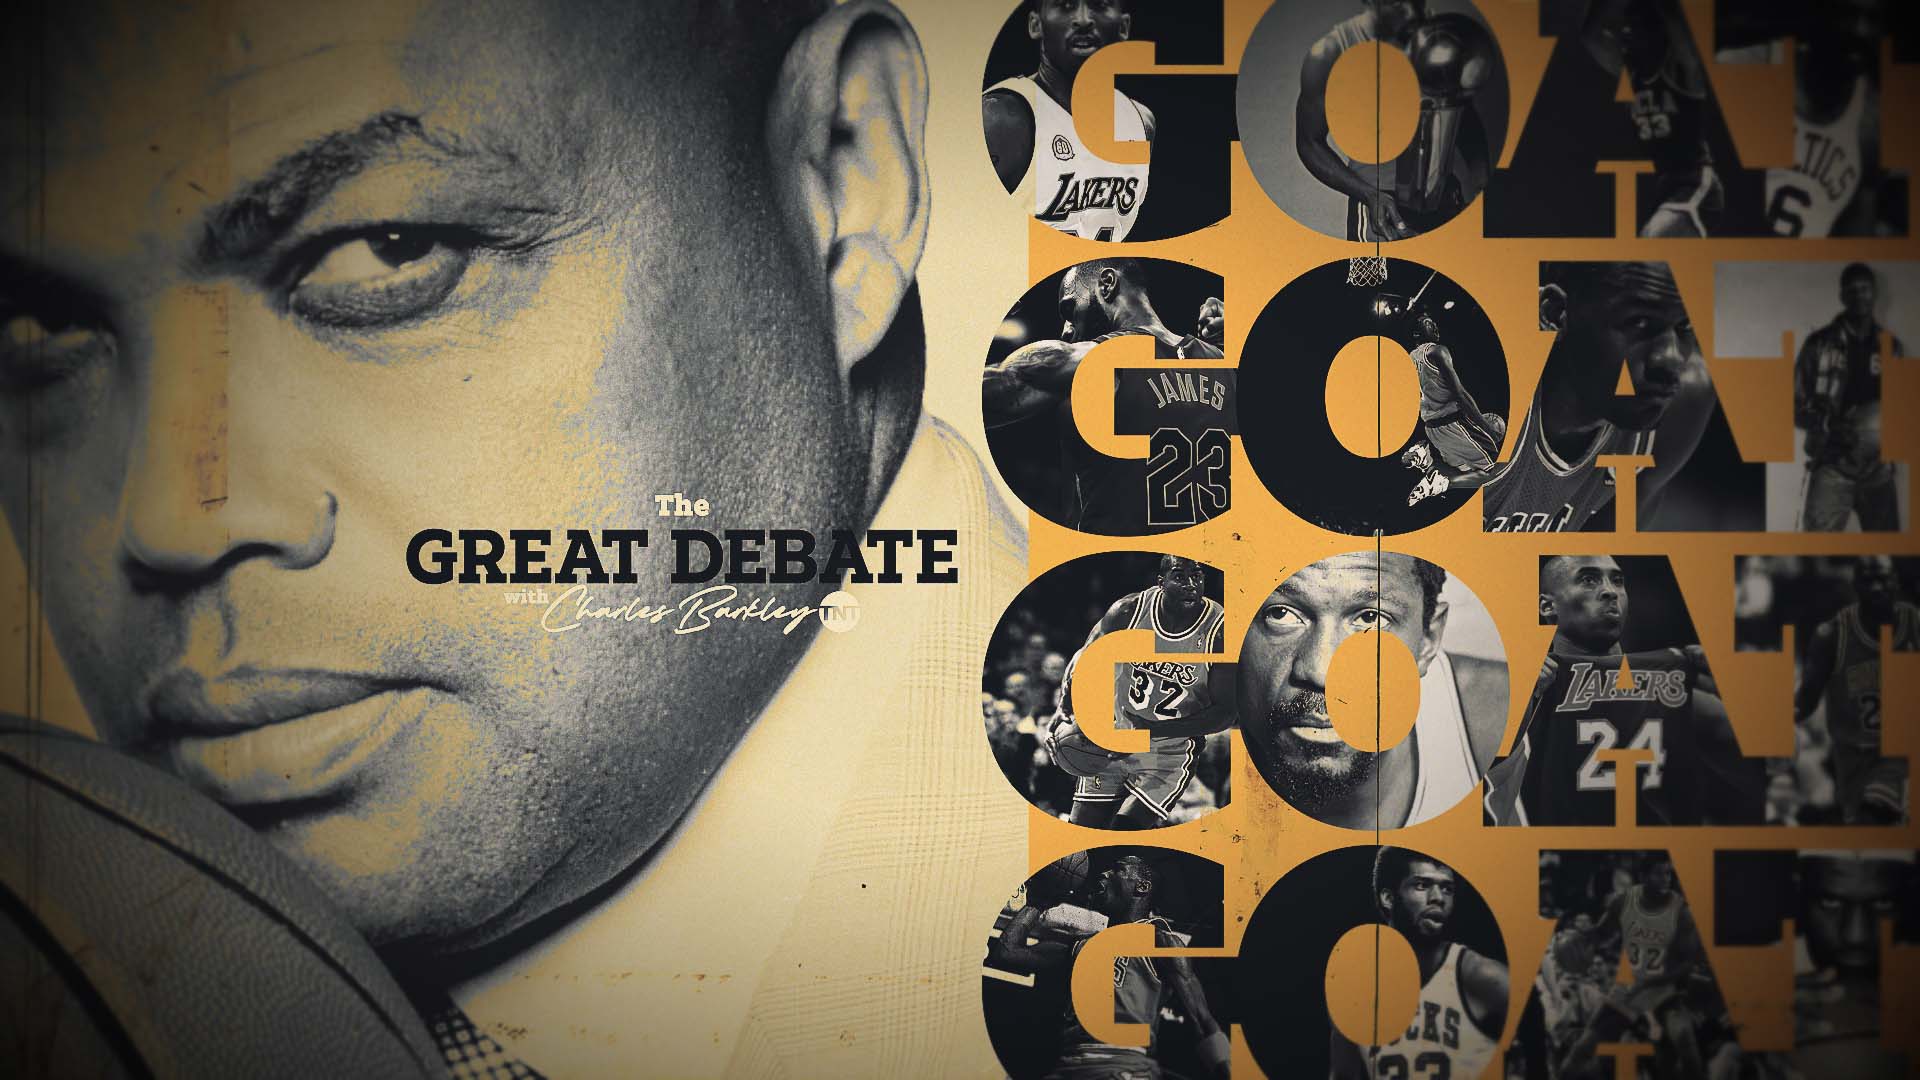 TNT "The Great Debate with Charles Barkley" Emmy Nominated "Edited Special"